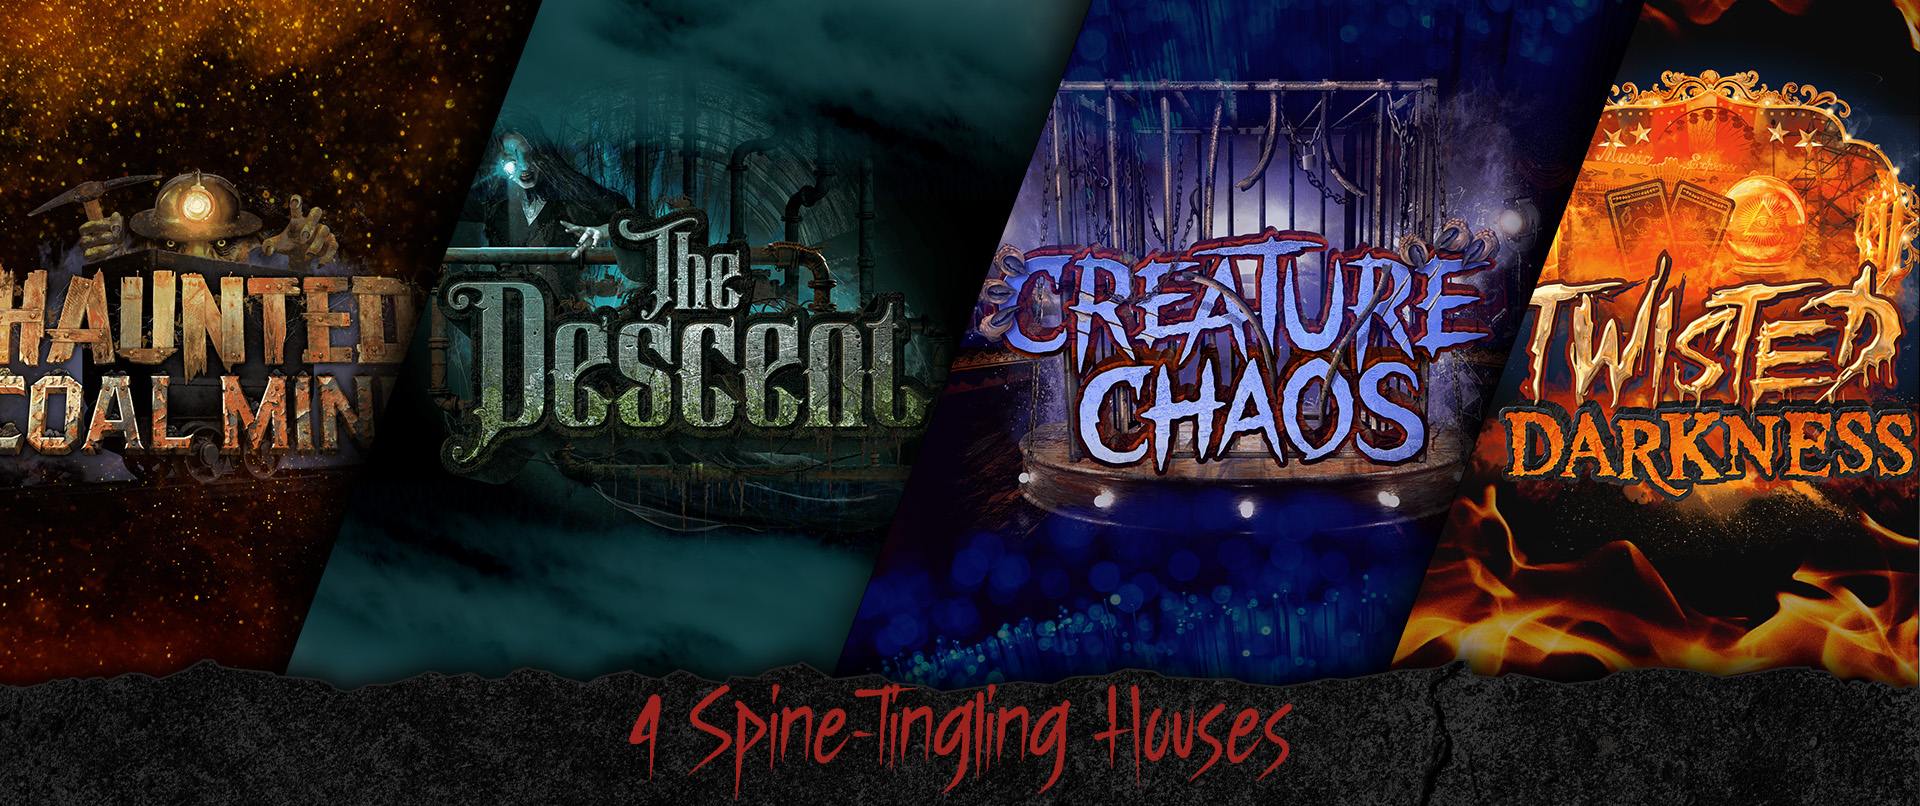 4 Spine-Tingling Houses